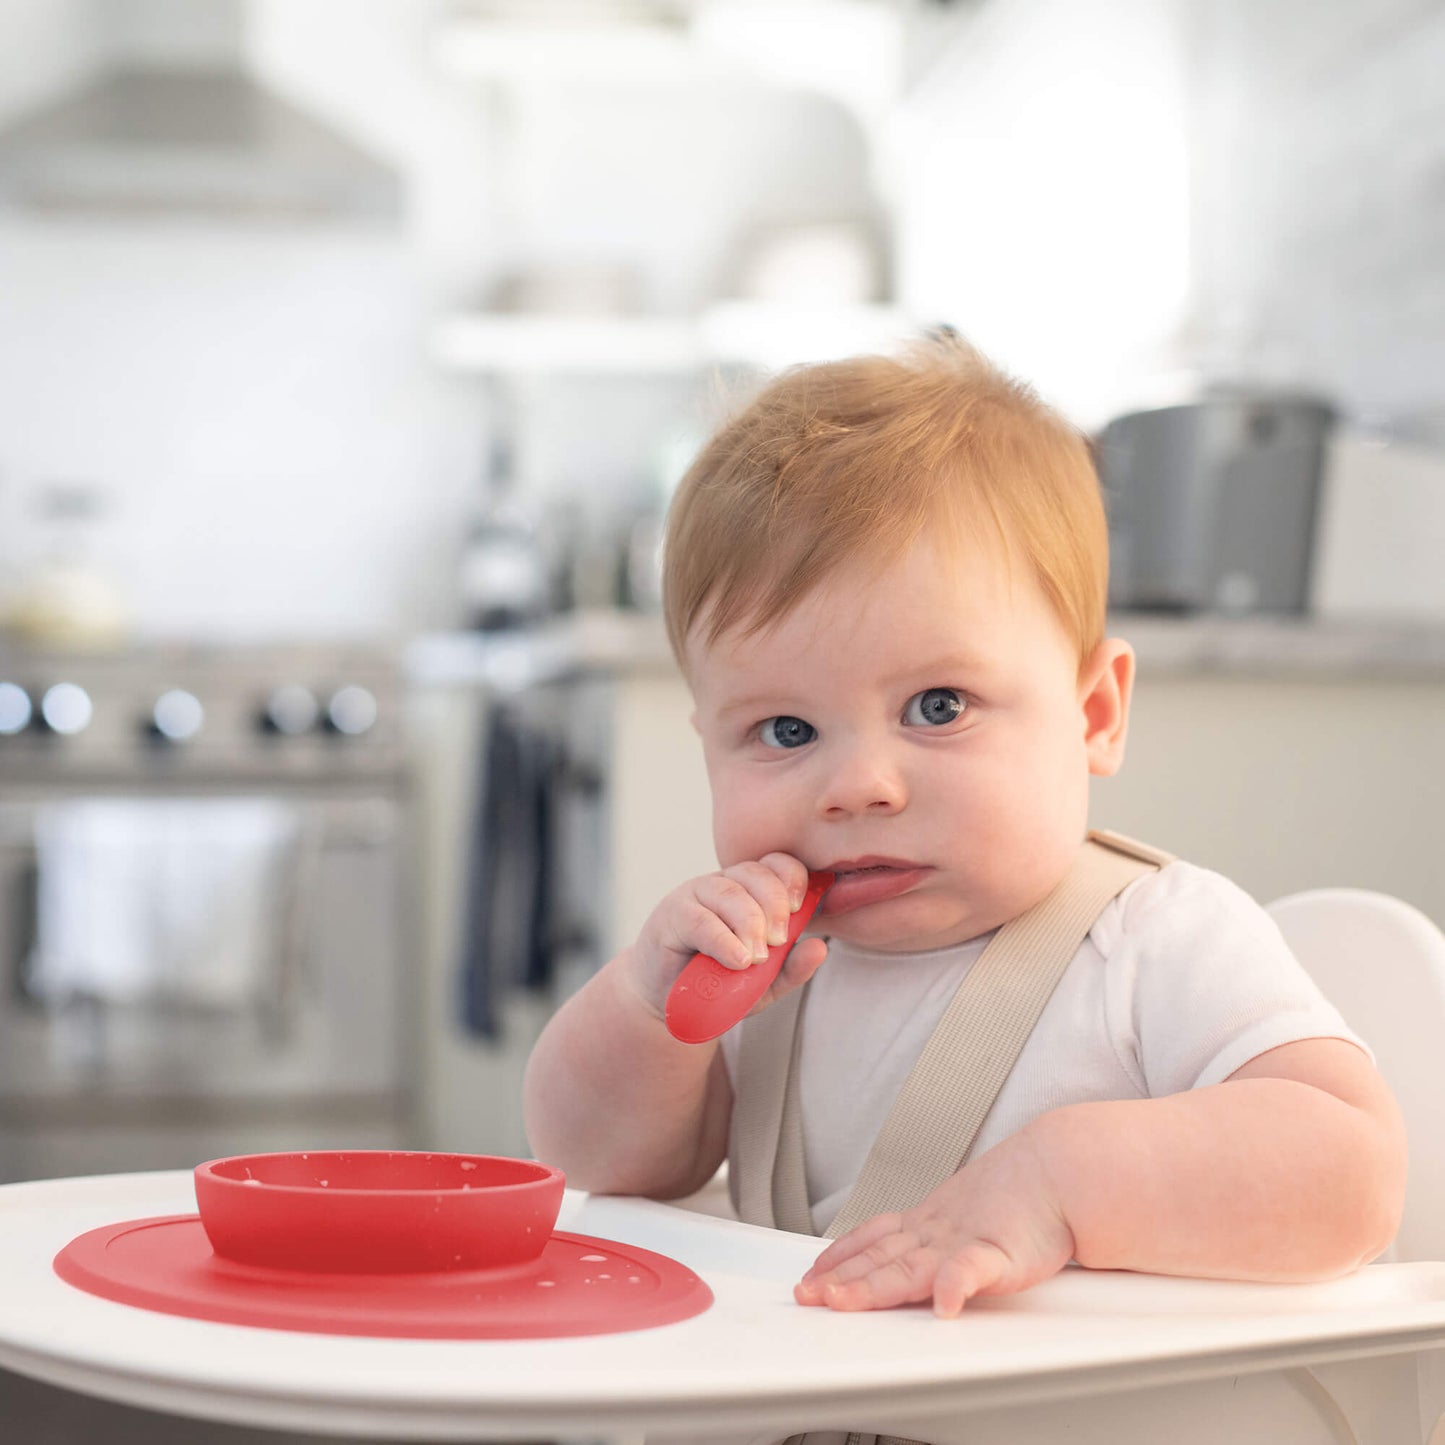 The Tiny Bowl in Coral by ezpz / Silicone Bowl for Babies that Fits on High Chairs